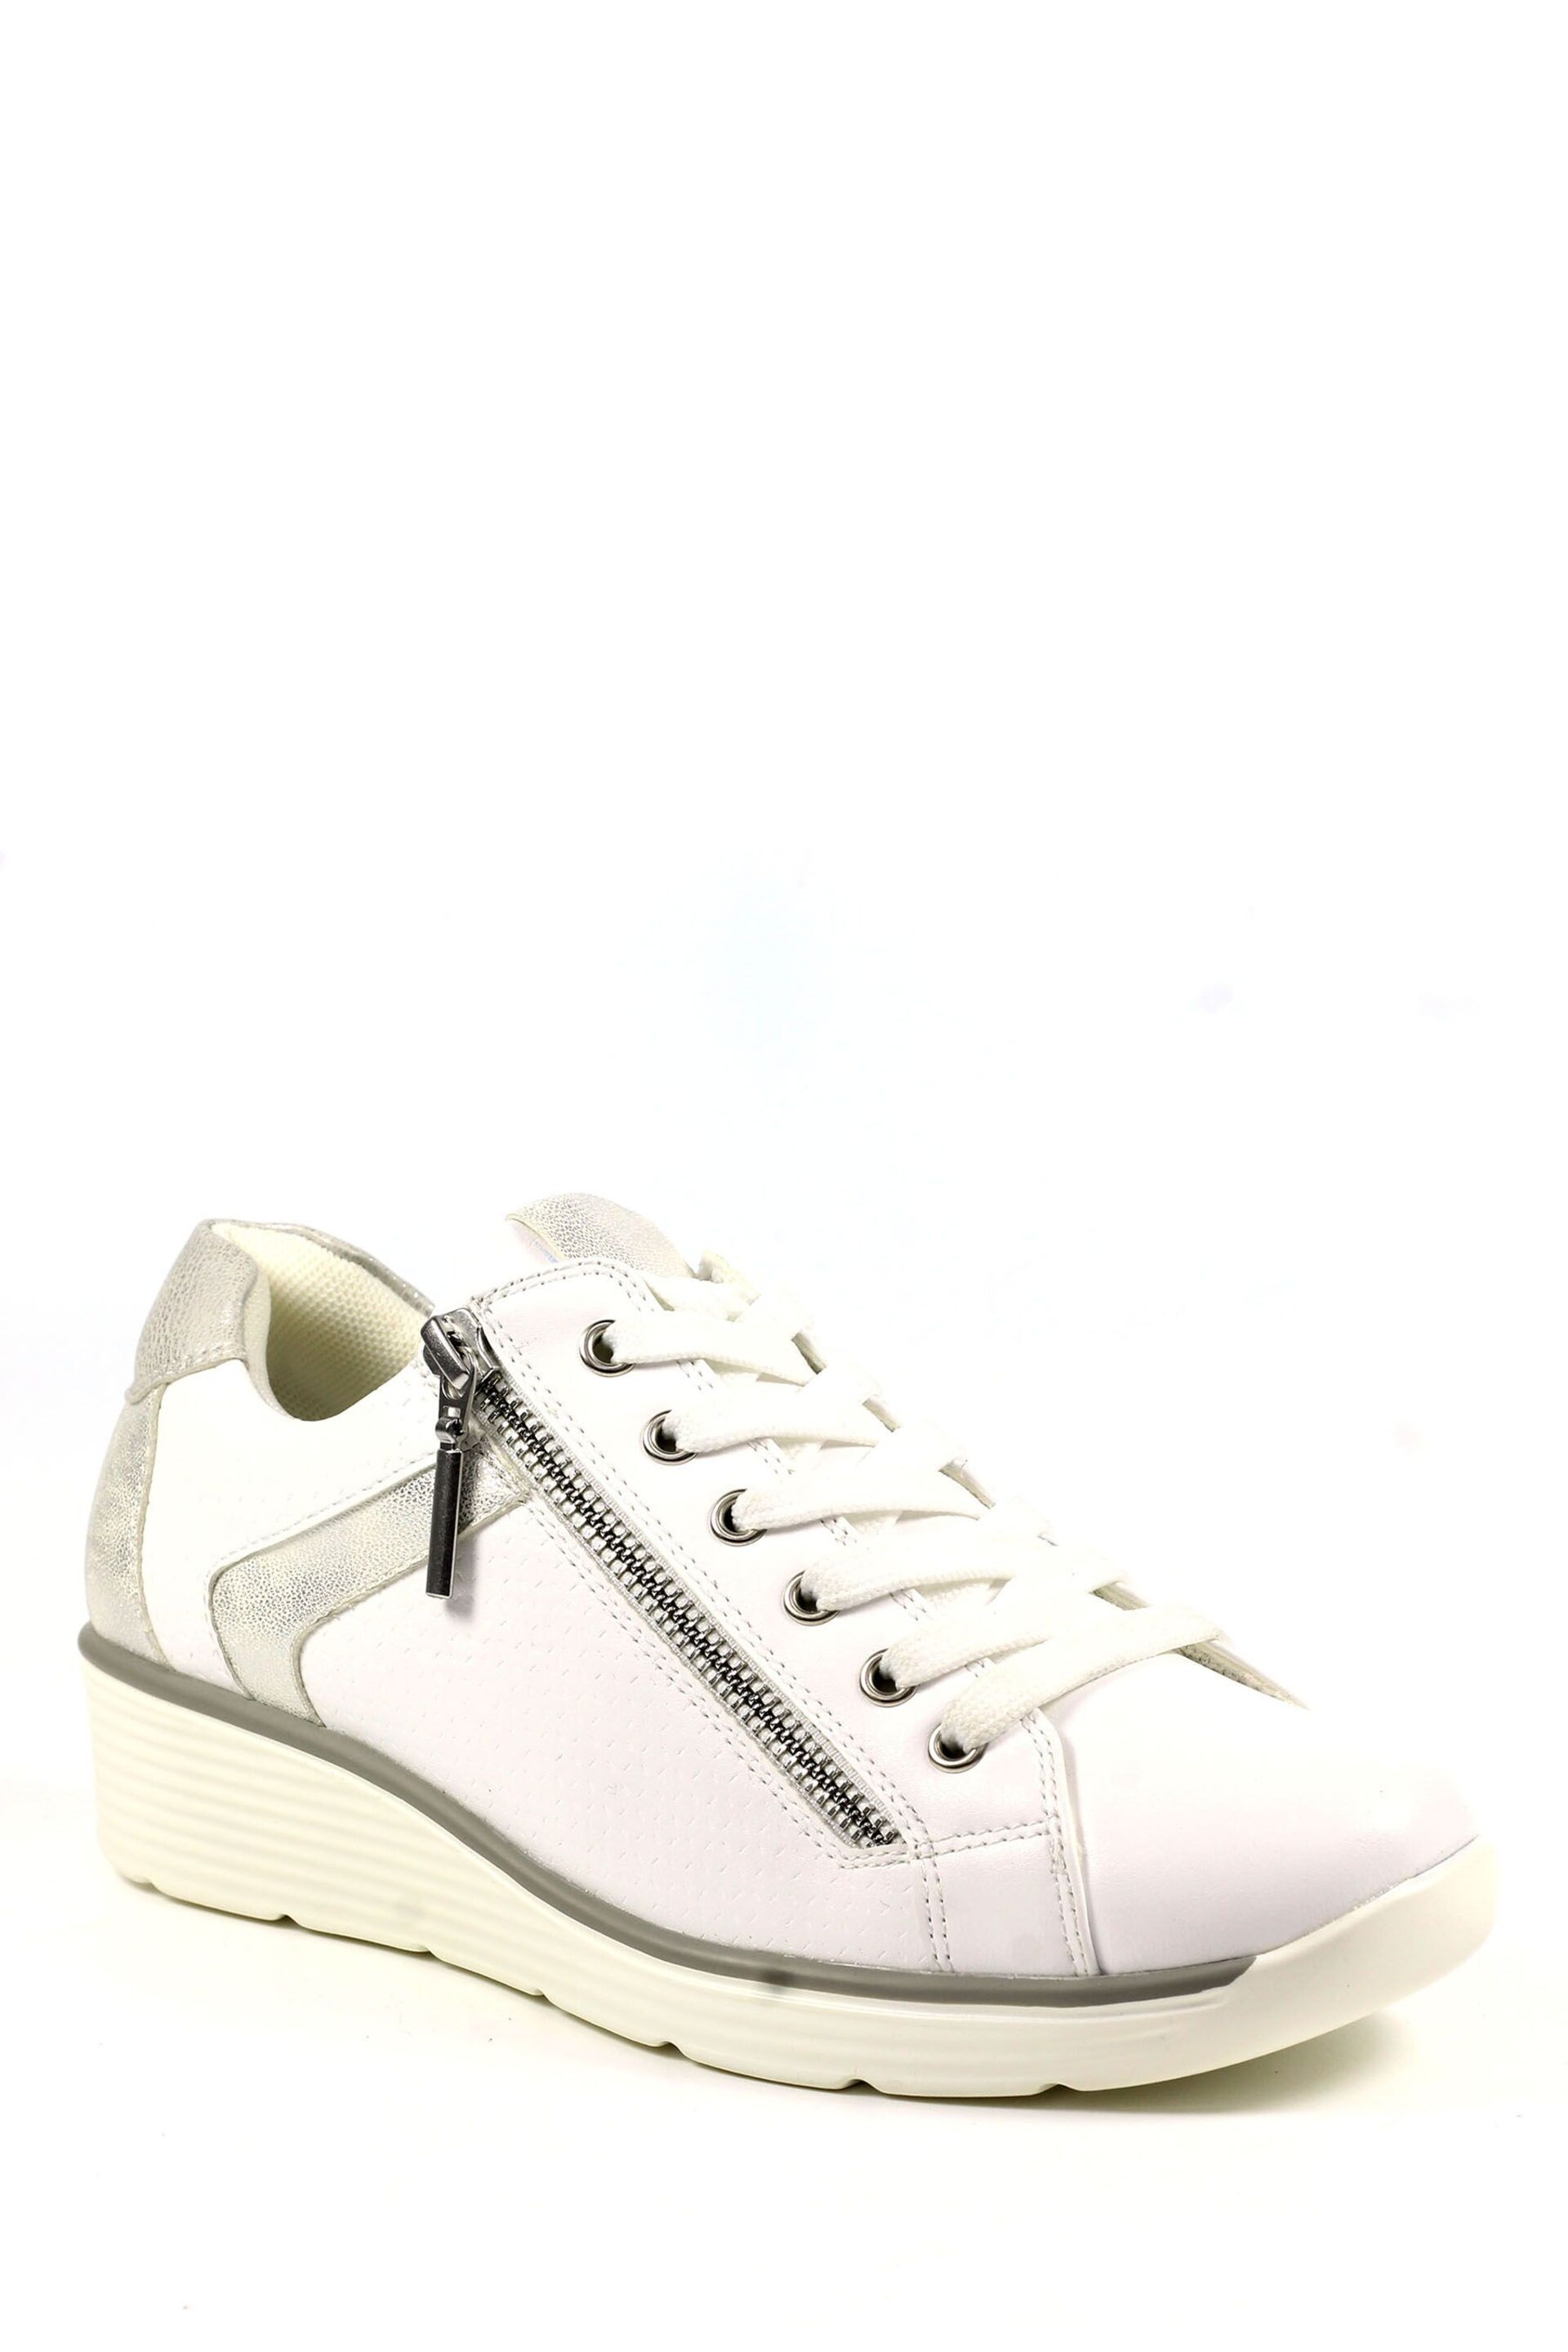 Lunar Lester White Trainers - Image 1 of 7